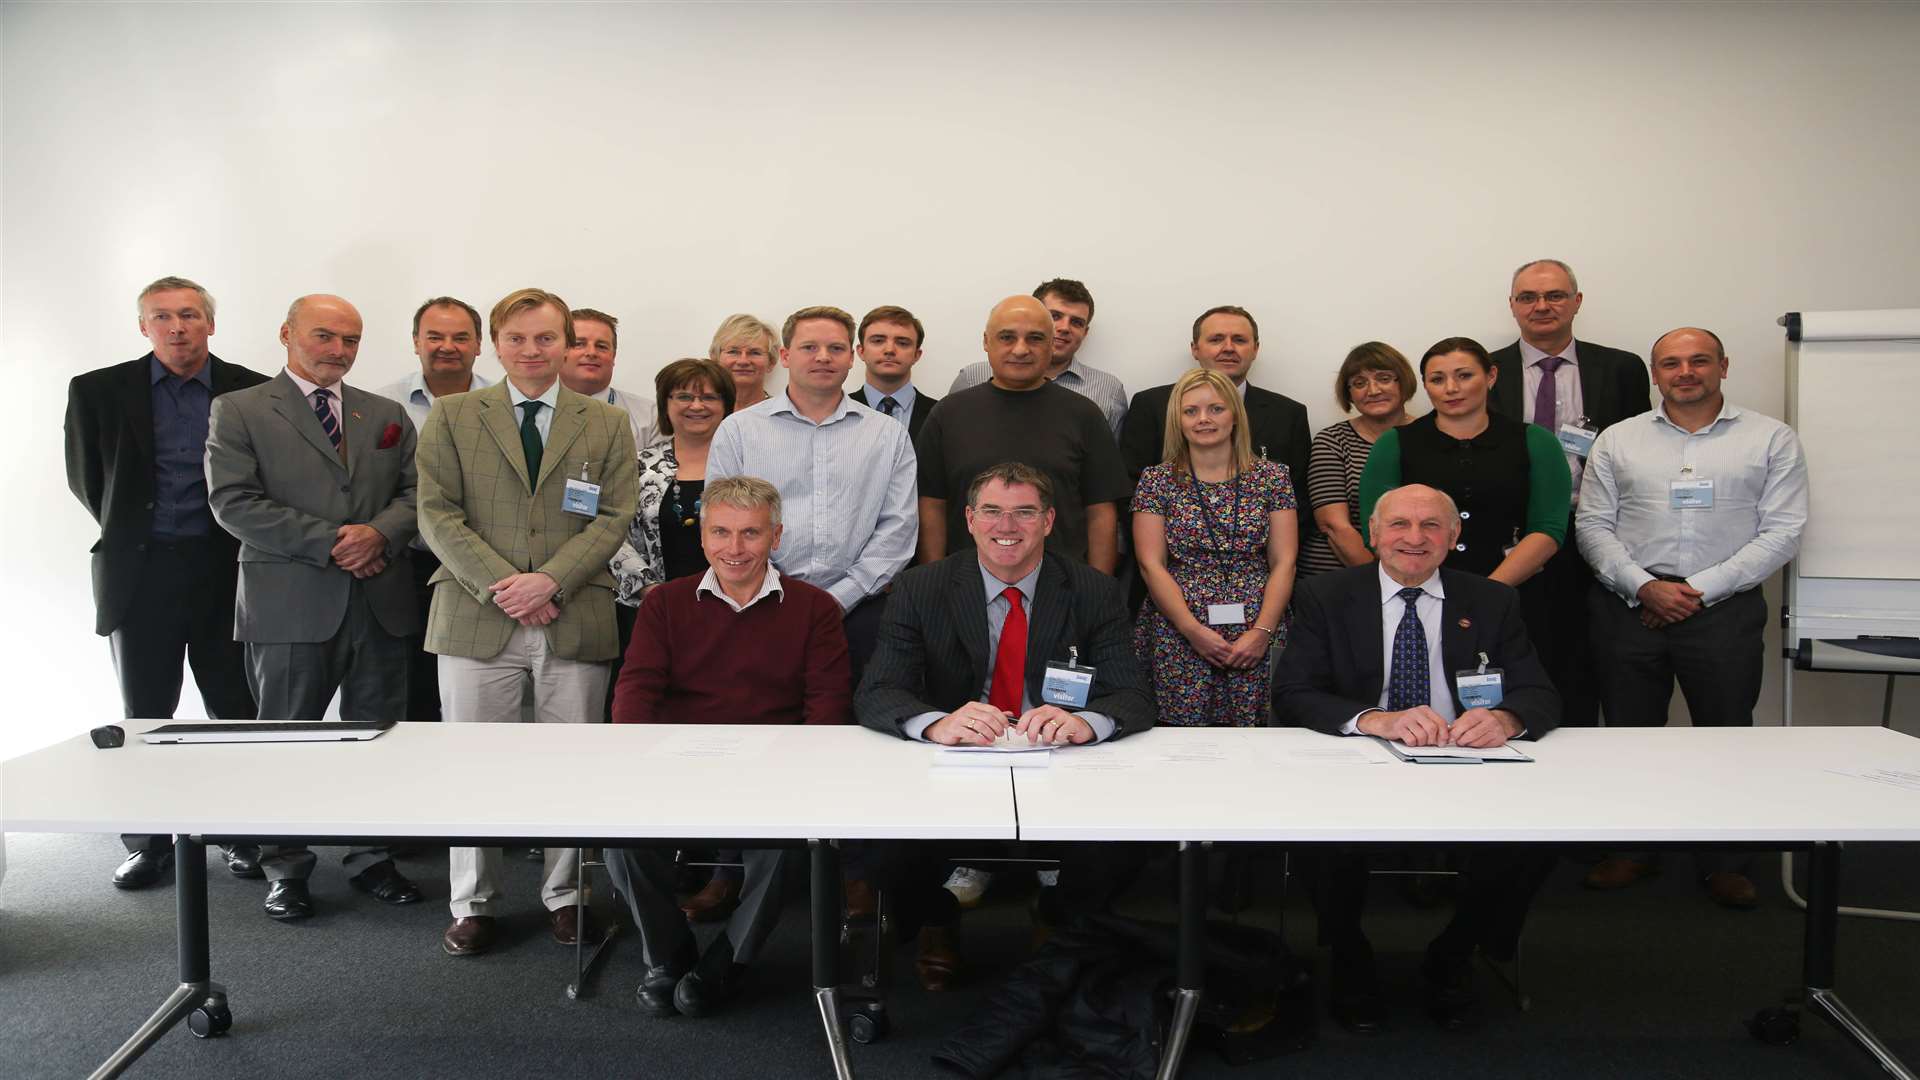 Cllr Ben Stokes (seated right) arranged the meeting for firms at Ridham Dock